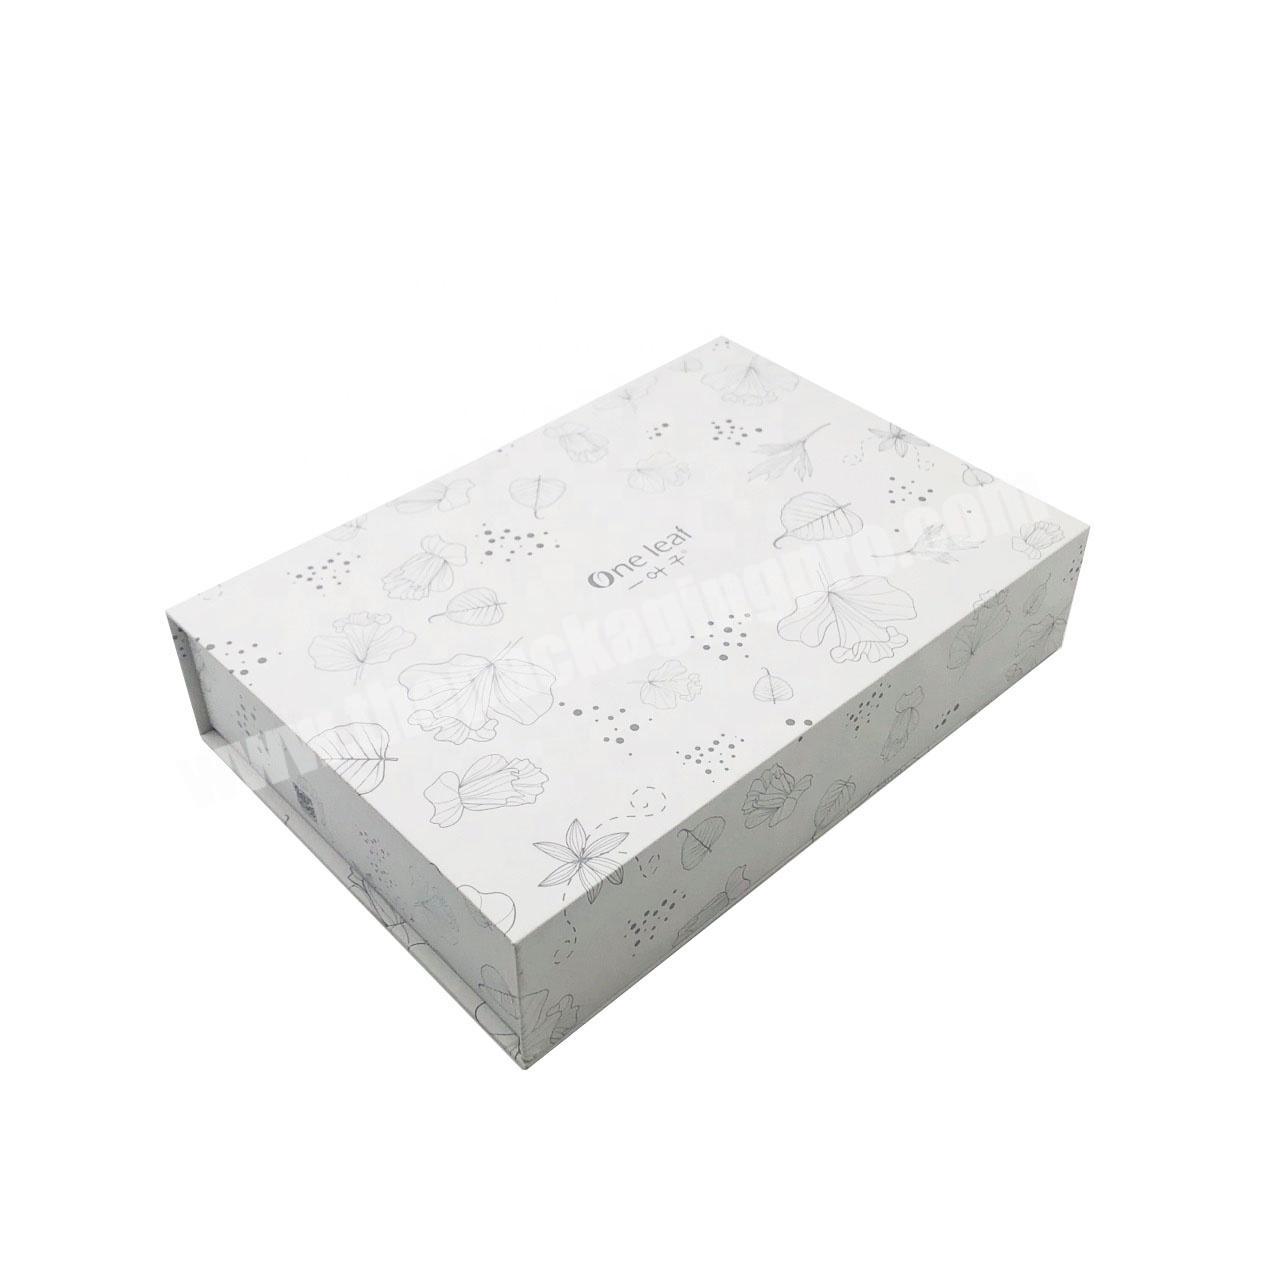 Customized full color printing Magnetic closure socks packaging boxes